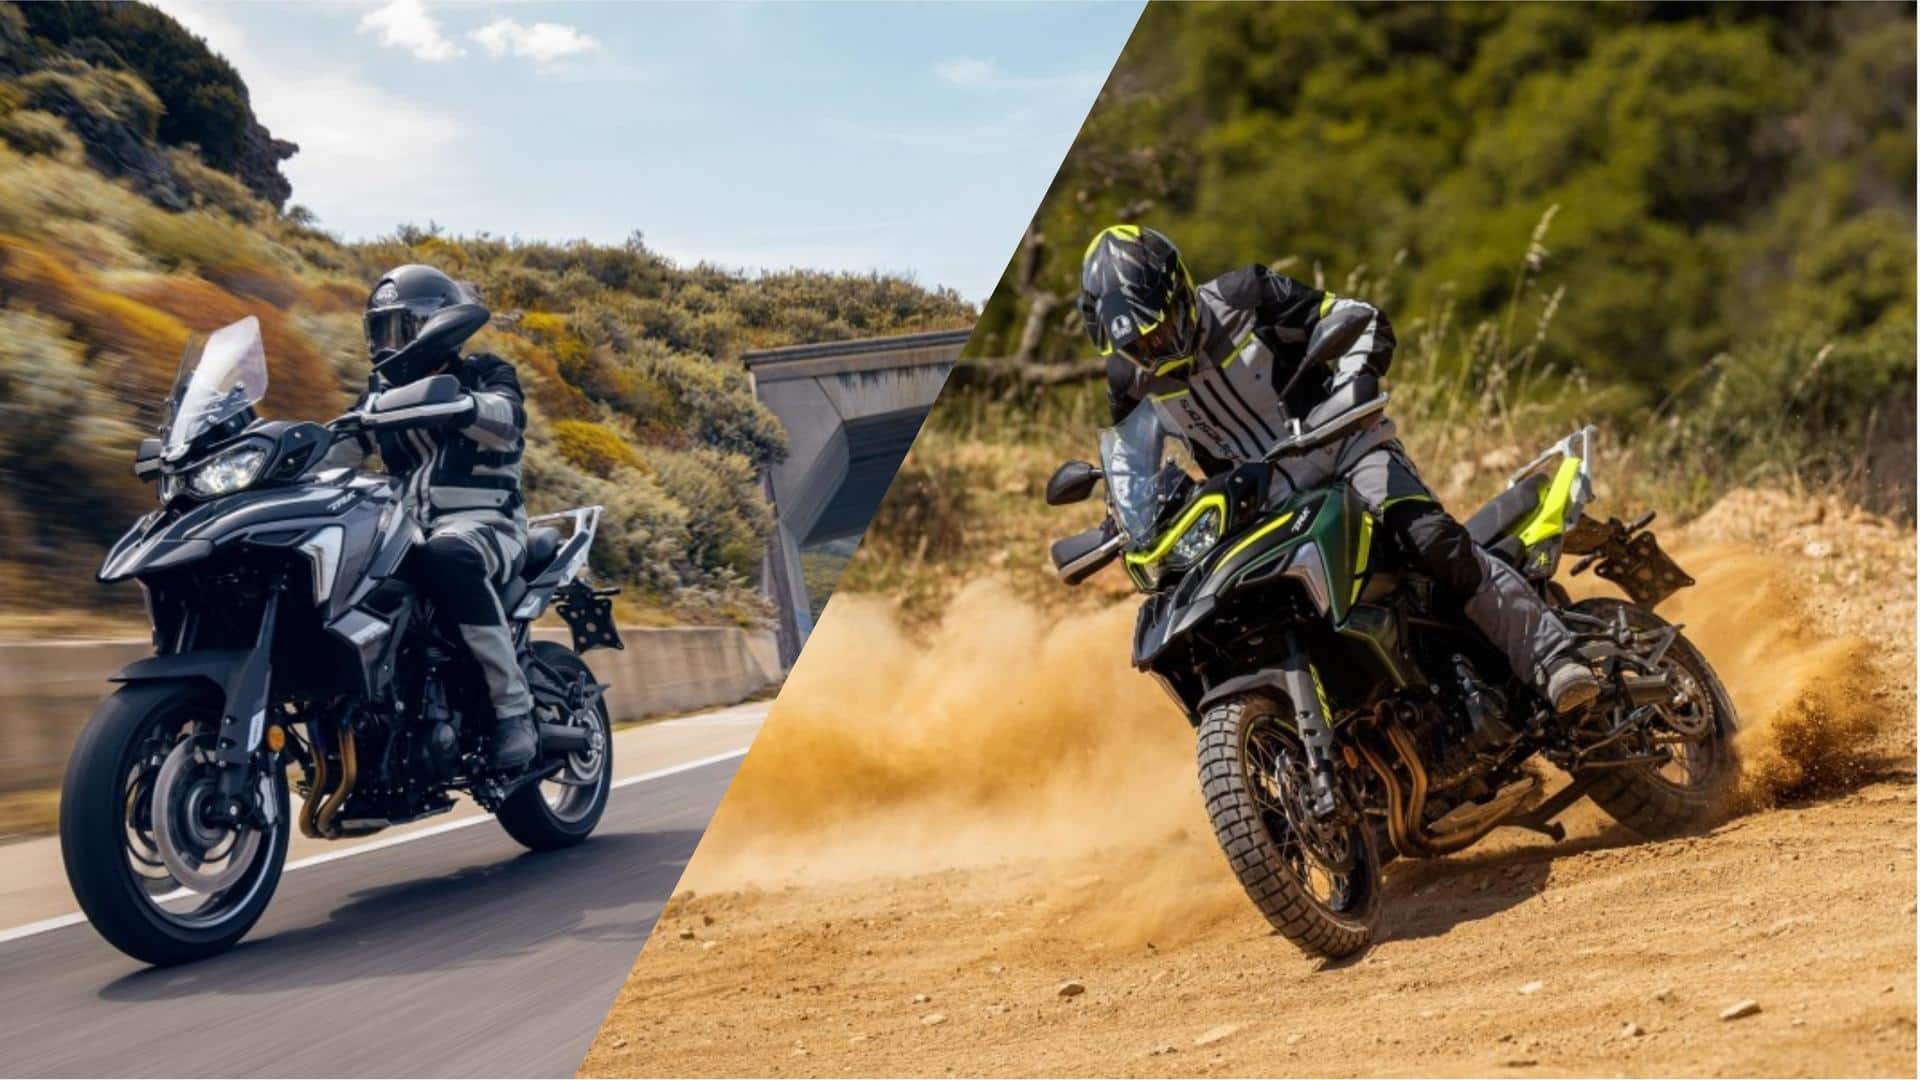 Benelli's TRK 702 ADV range goes official: Check best features